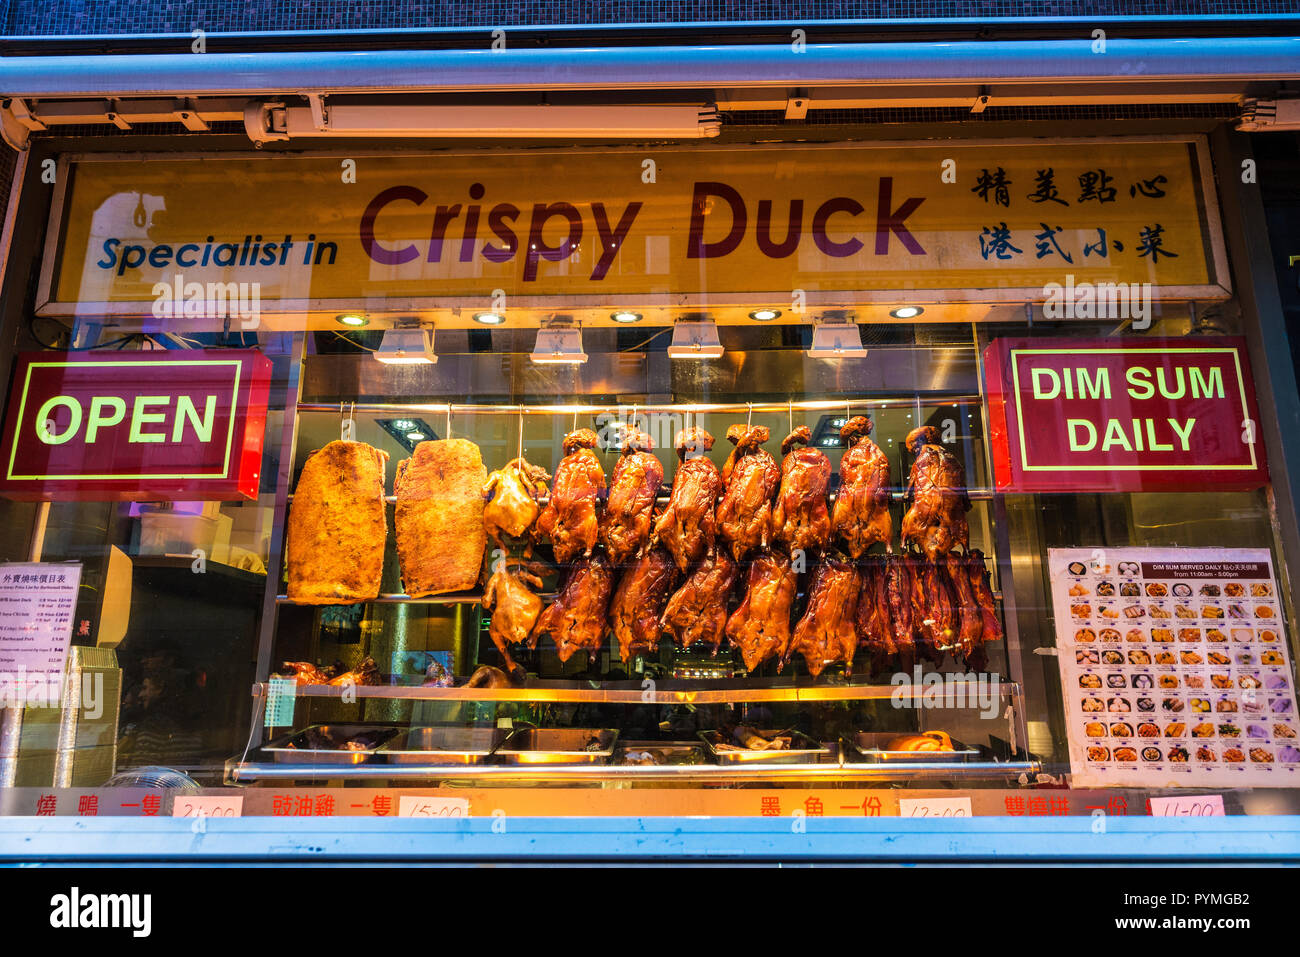 London, United Kingdom - January 4, 2018: Display of a restaurant of Chinatown with crispy ducks hung in London, England, United Kingdom Stock Photo